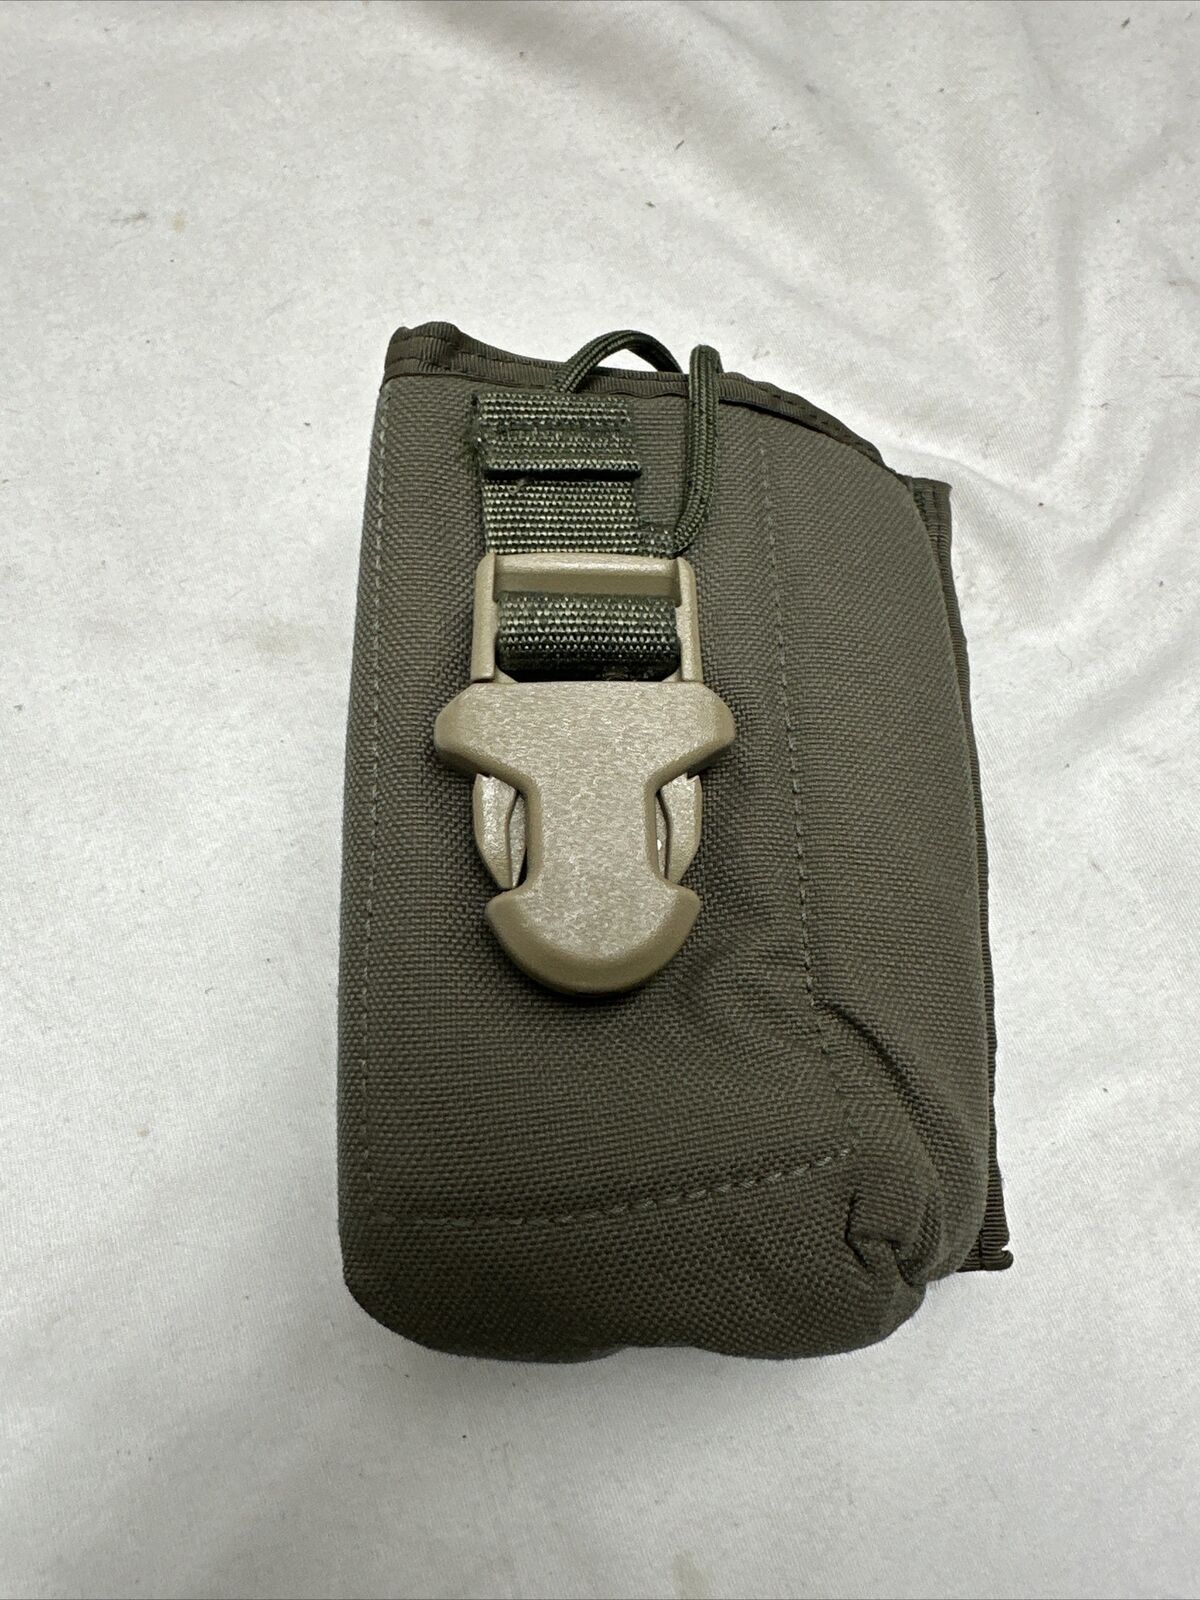 Used Eagle Allied Industries Ranger Green RLCS ICOM Small Radio Pouch Baofeng